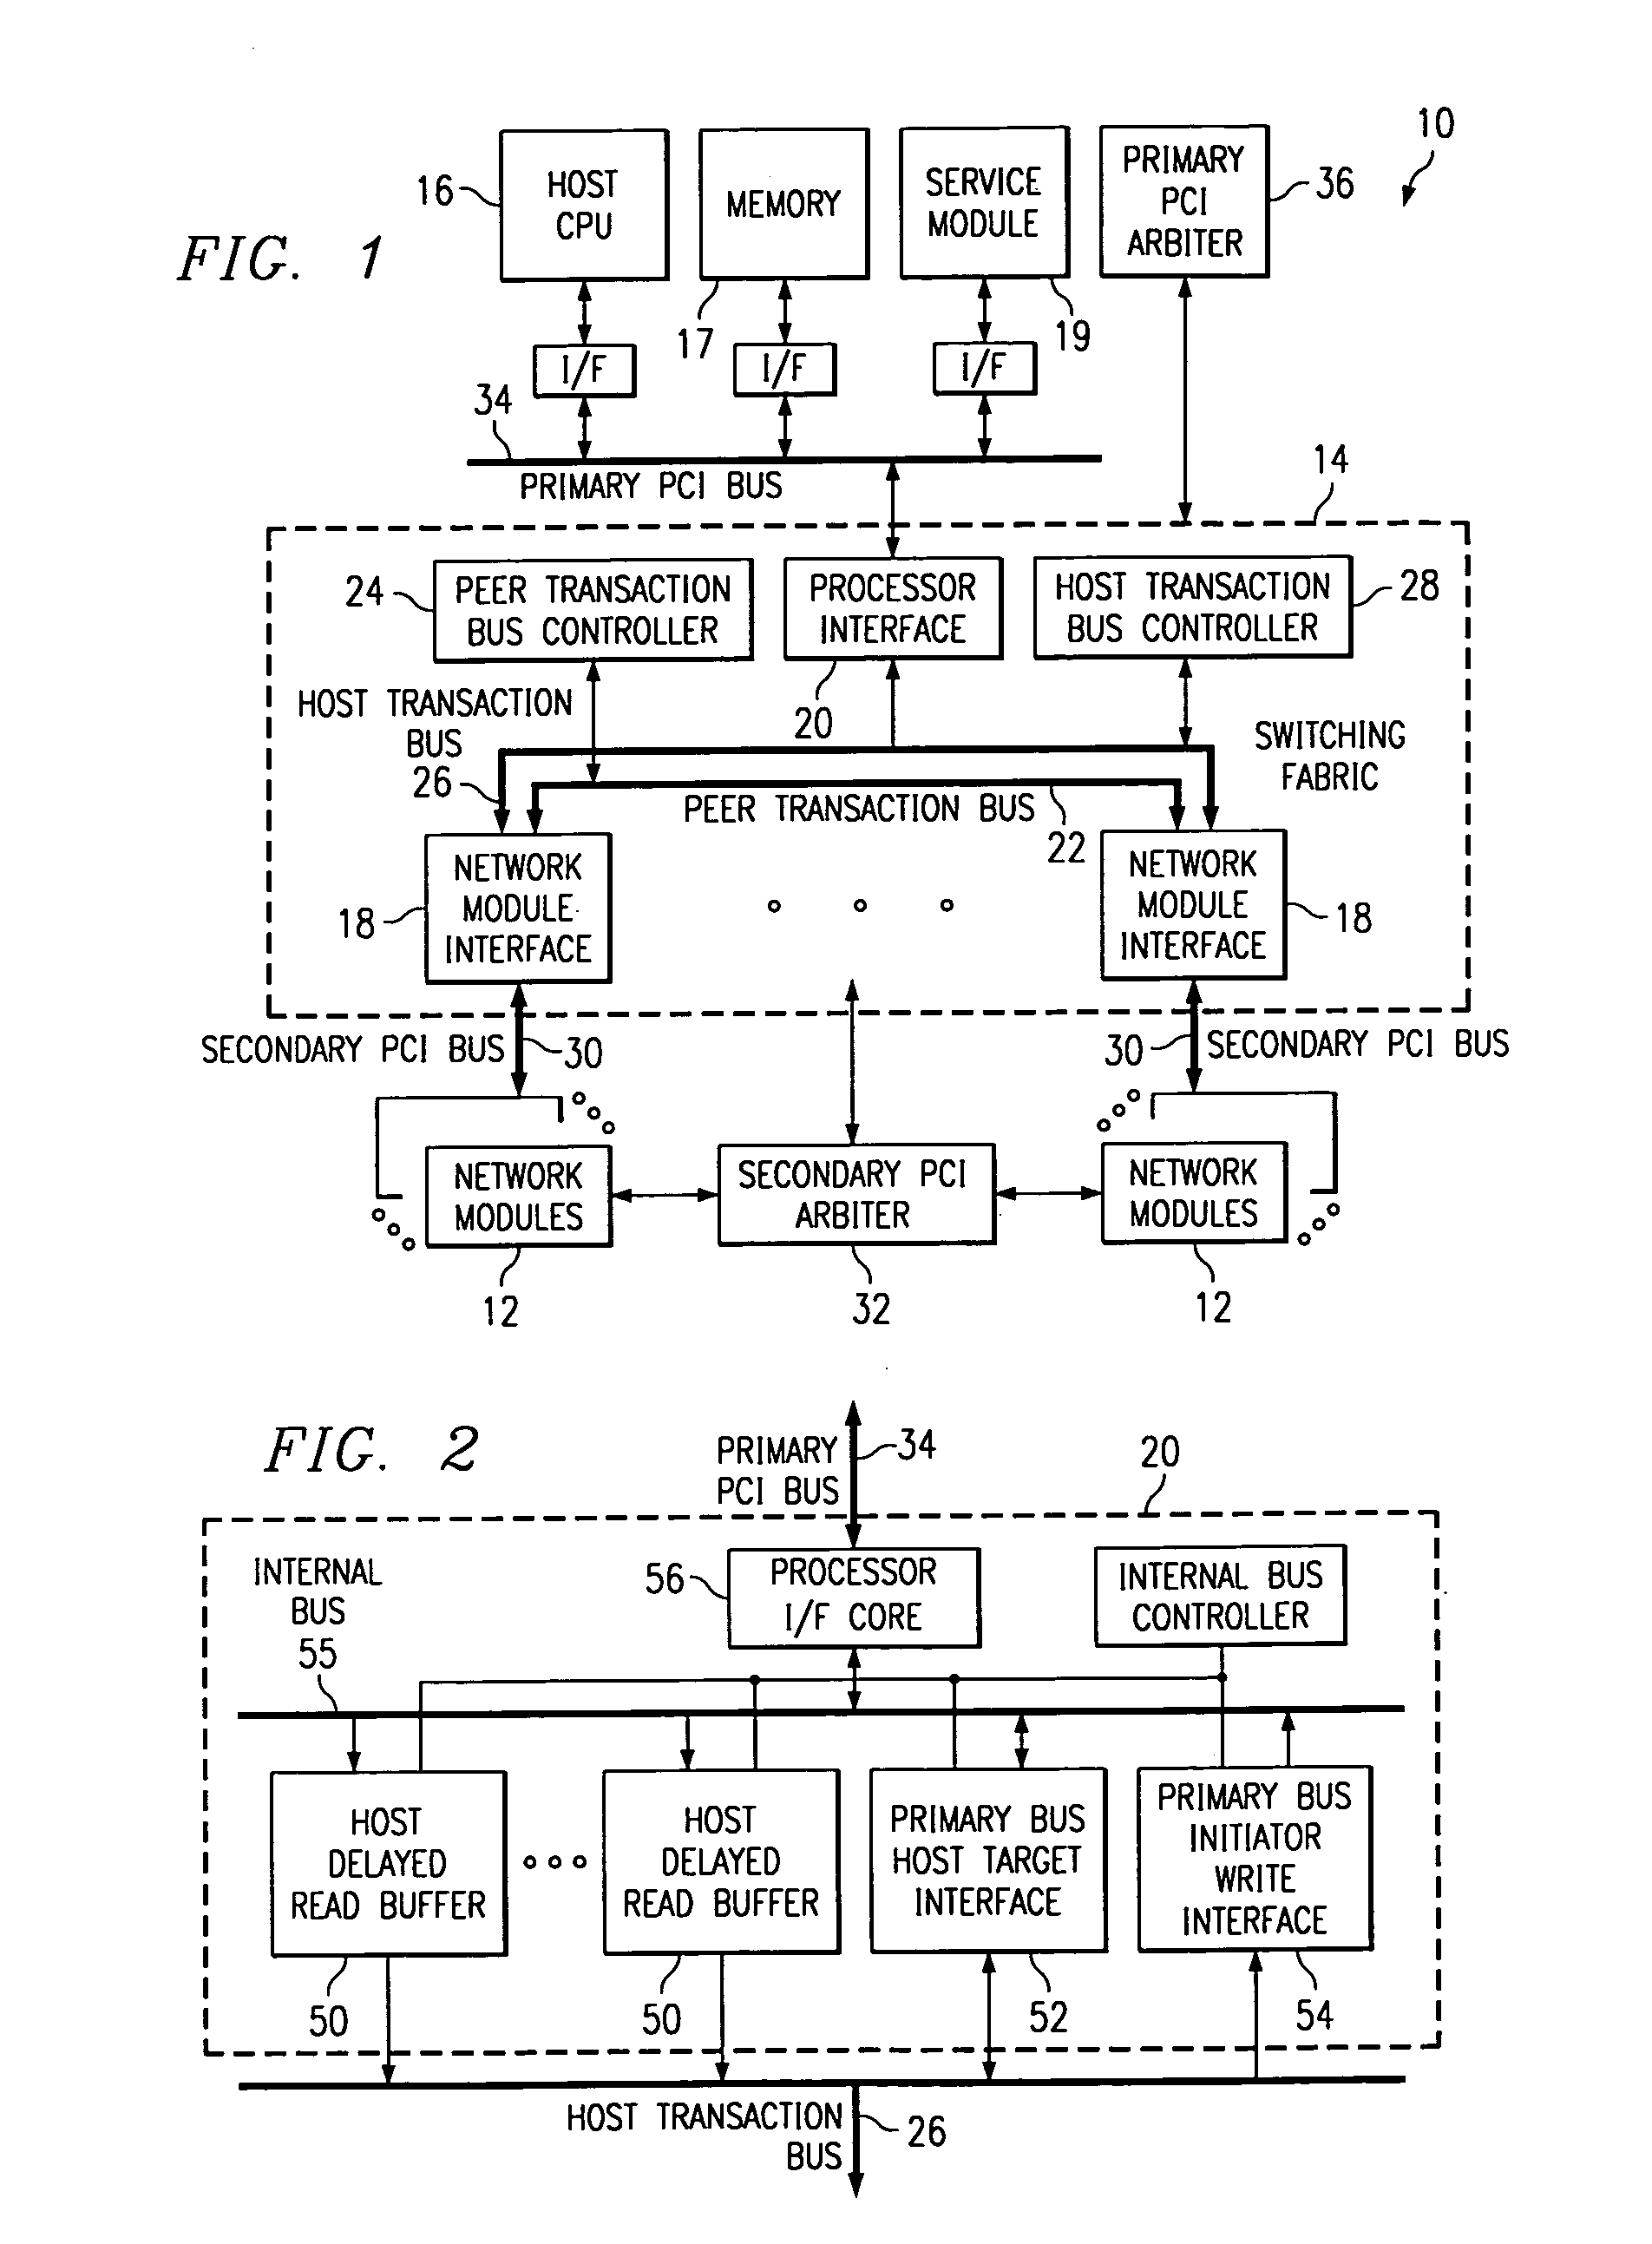 Switching fabric for interfacing a host processor and a plurality of network modules